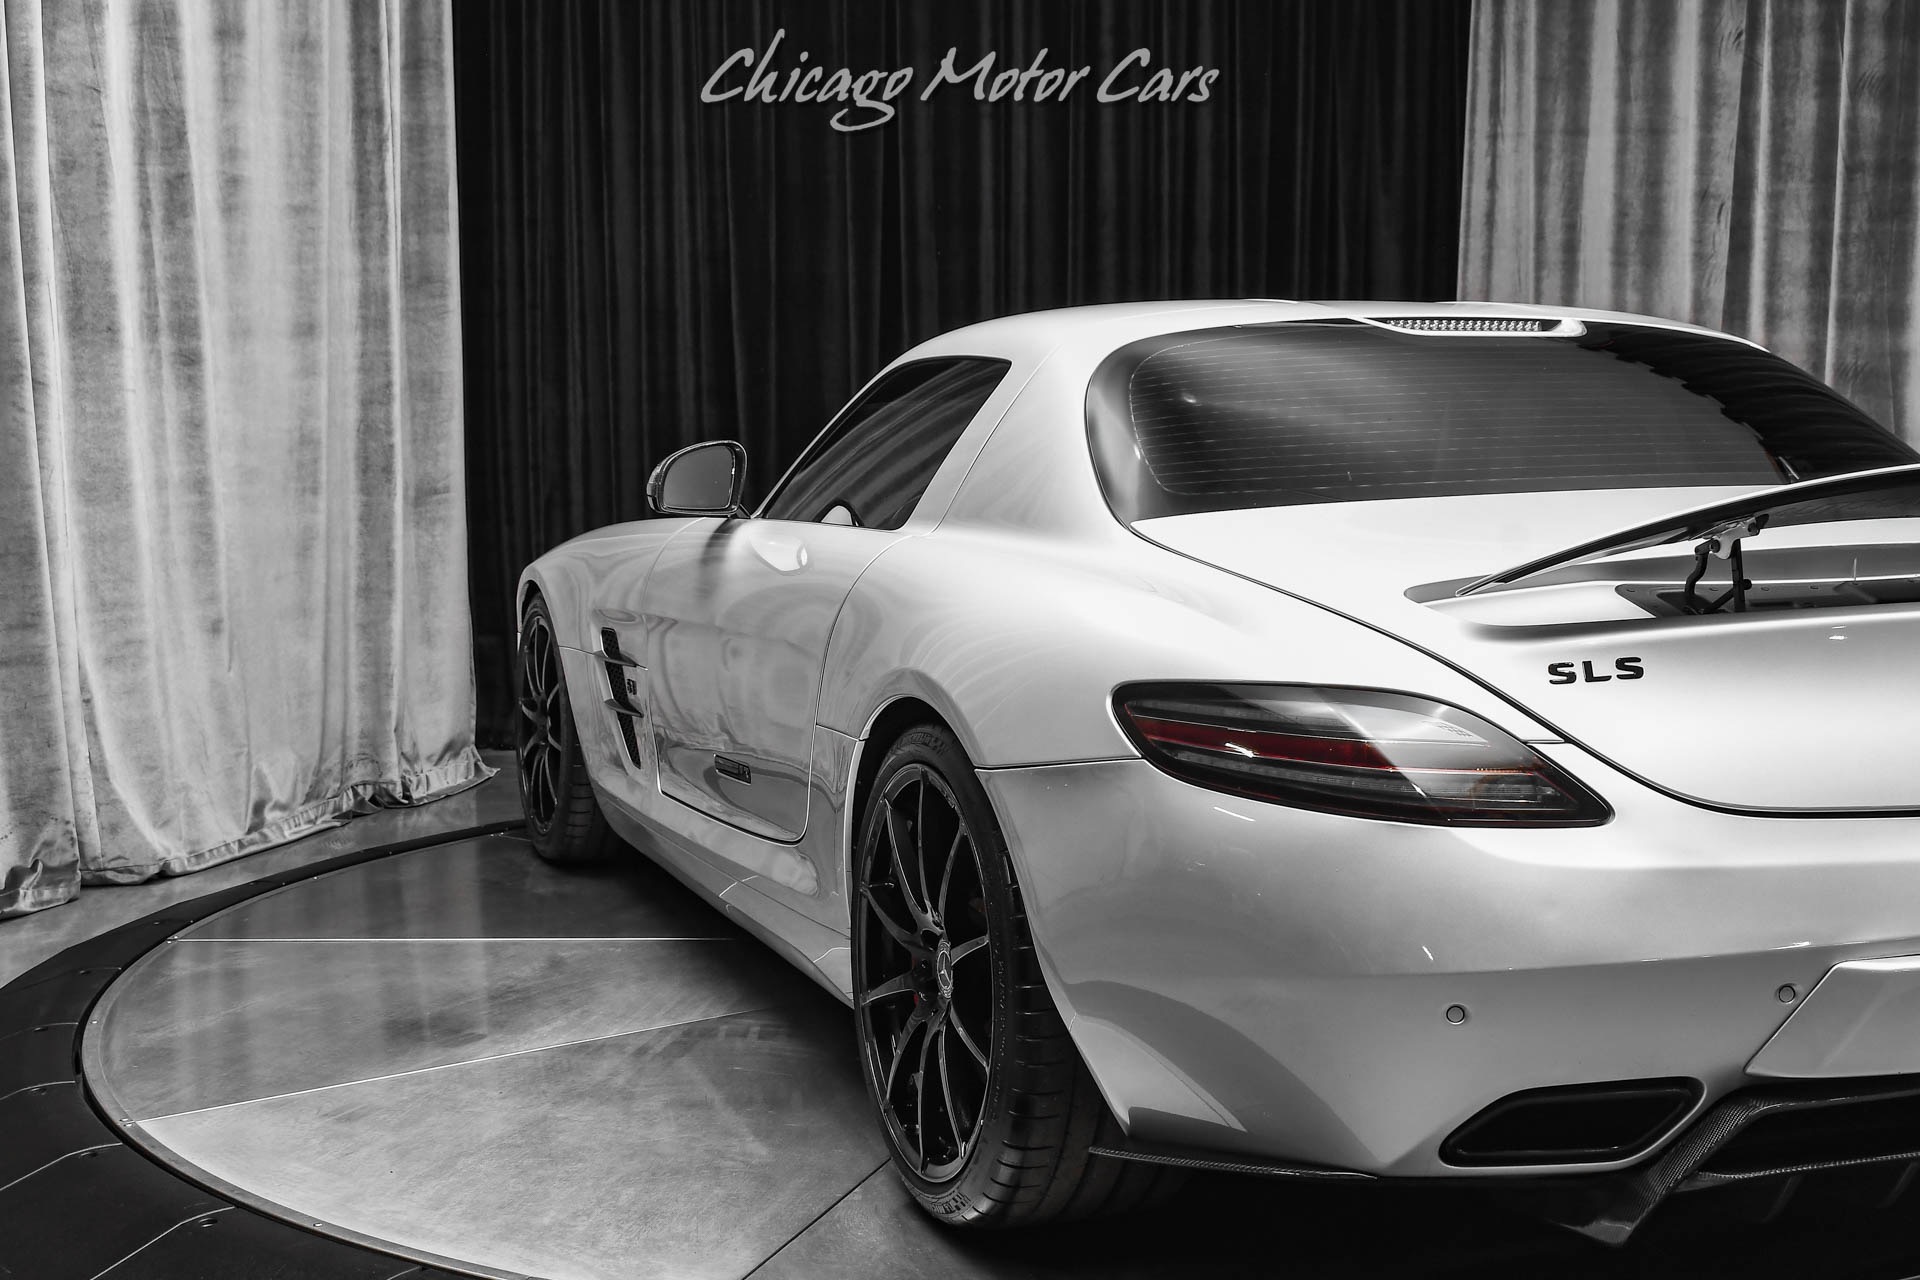 Used-2011-Mercedes-Benz-SLS-AMG-Gullwing-Coupe-RARE-HOT-Spec-TONS-of-Carbon-Fiber-AMG-Suspension